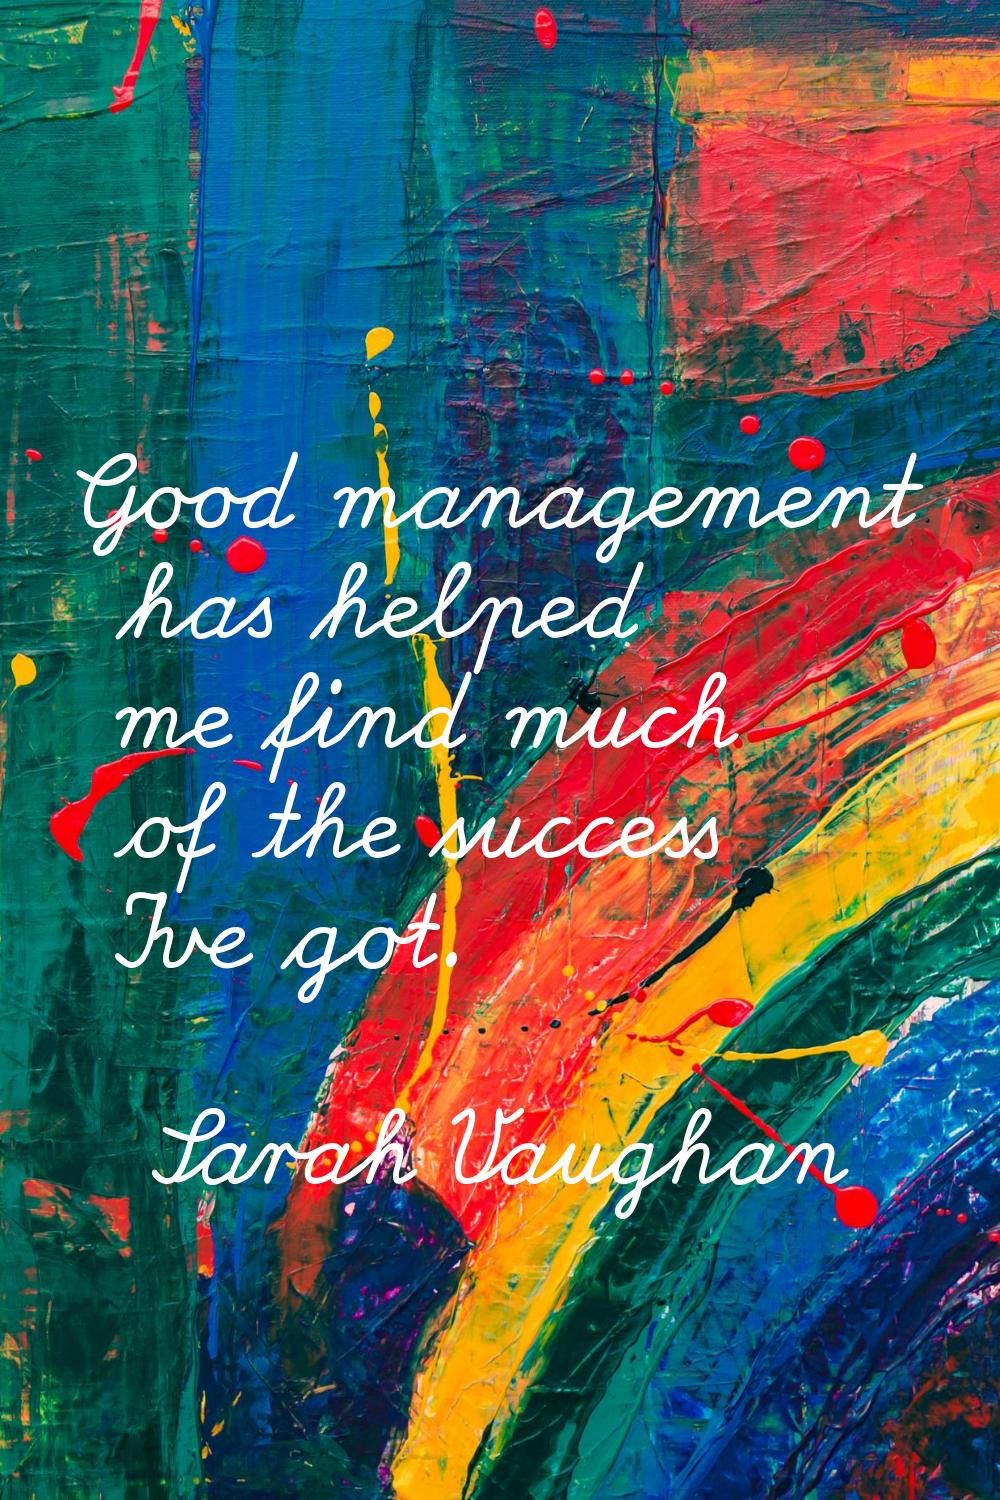 Good management has helped me find much of the success I've got.